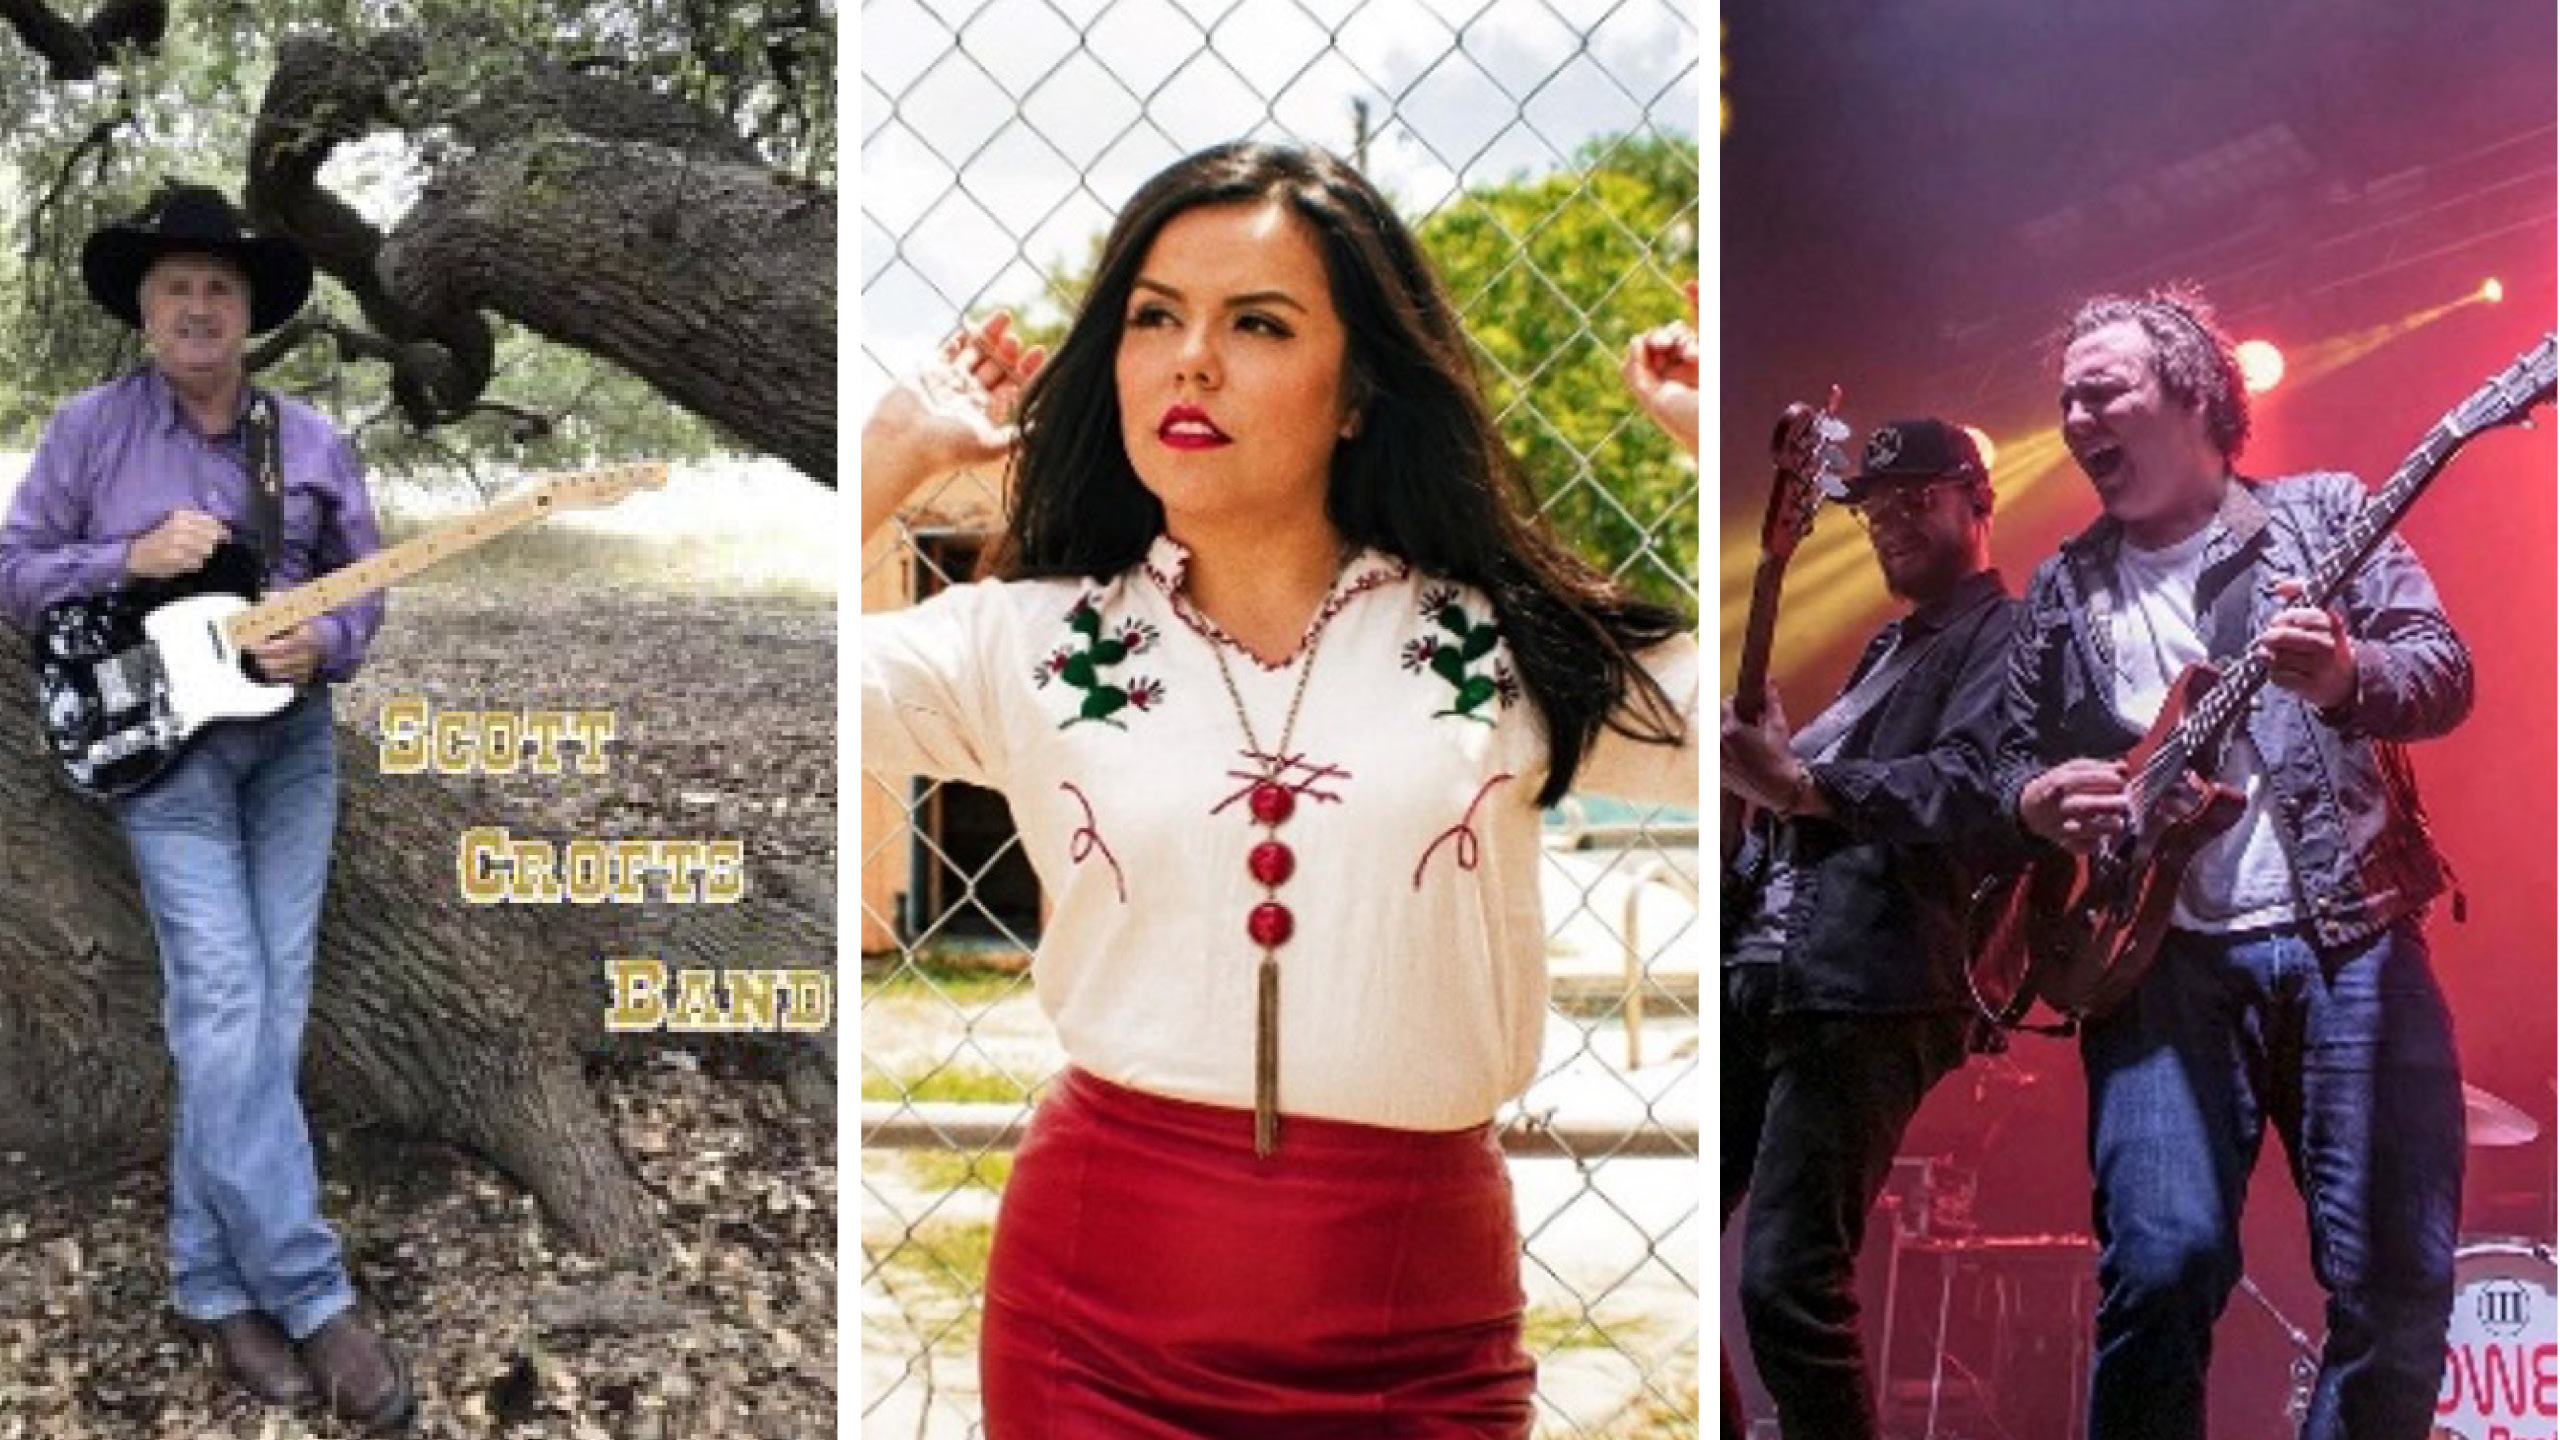 Three picture layout. From left to right: Scott Crofts Band with frontman holding electric guitar as he leans up against a tree; Middle: a young woman poses with her back to a chain link fence; Right: Two men sing back to back while holding electric guitars on stage. 